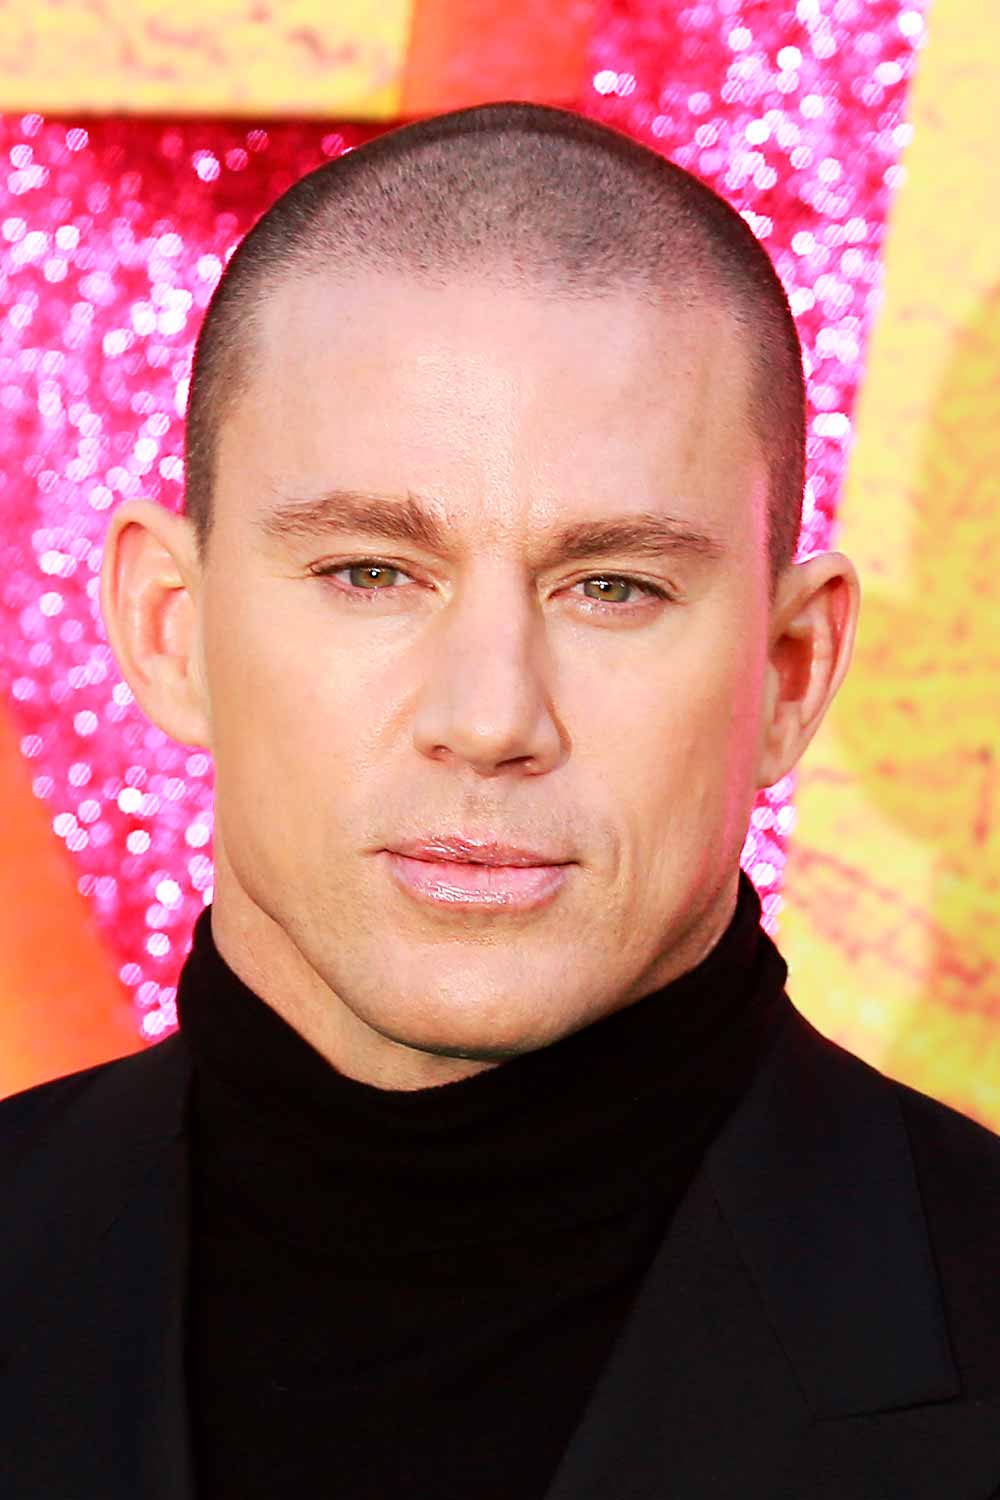 Number 2 Haircut Channing Tatum #haircutnumbers #hairclippersizes